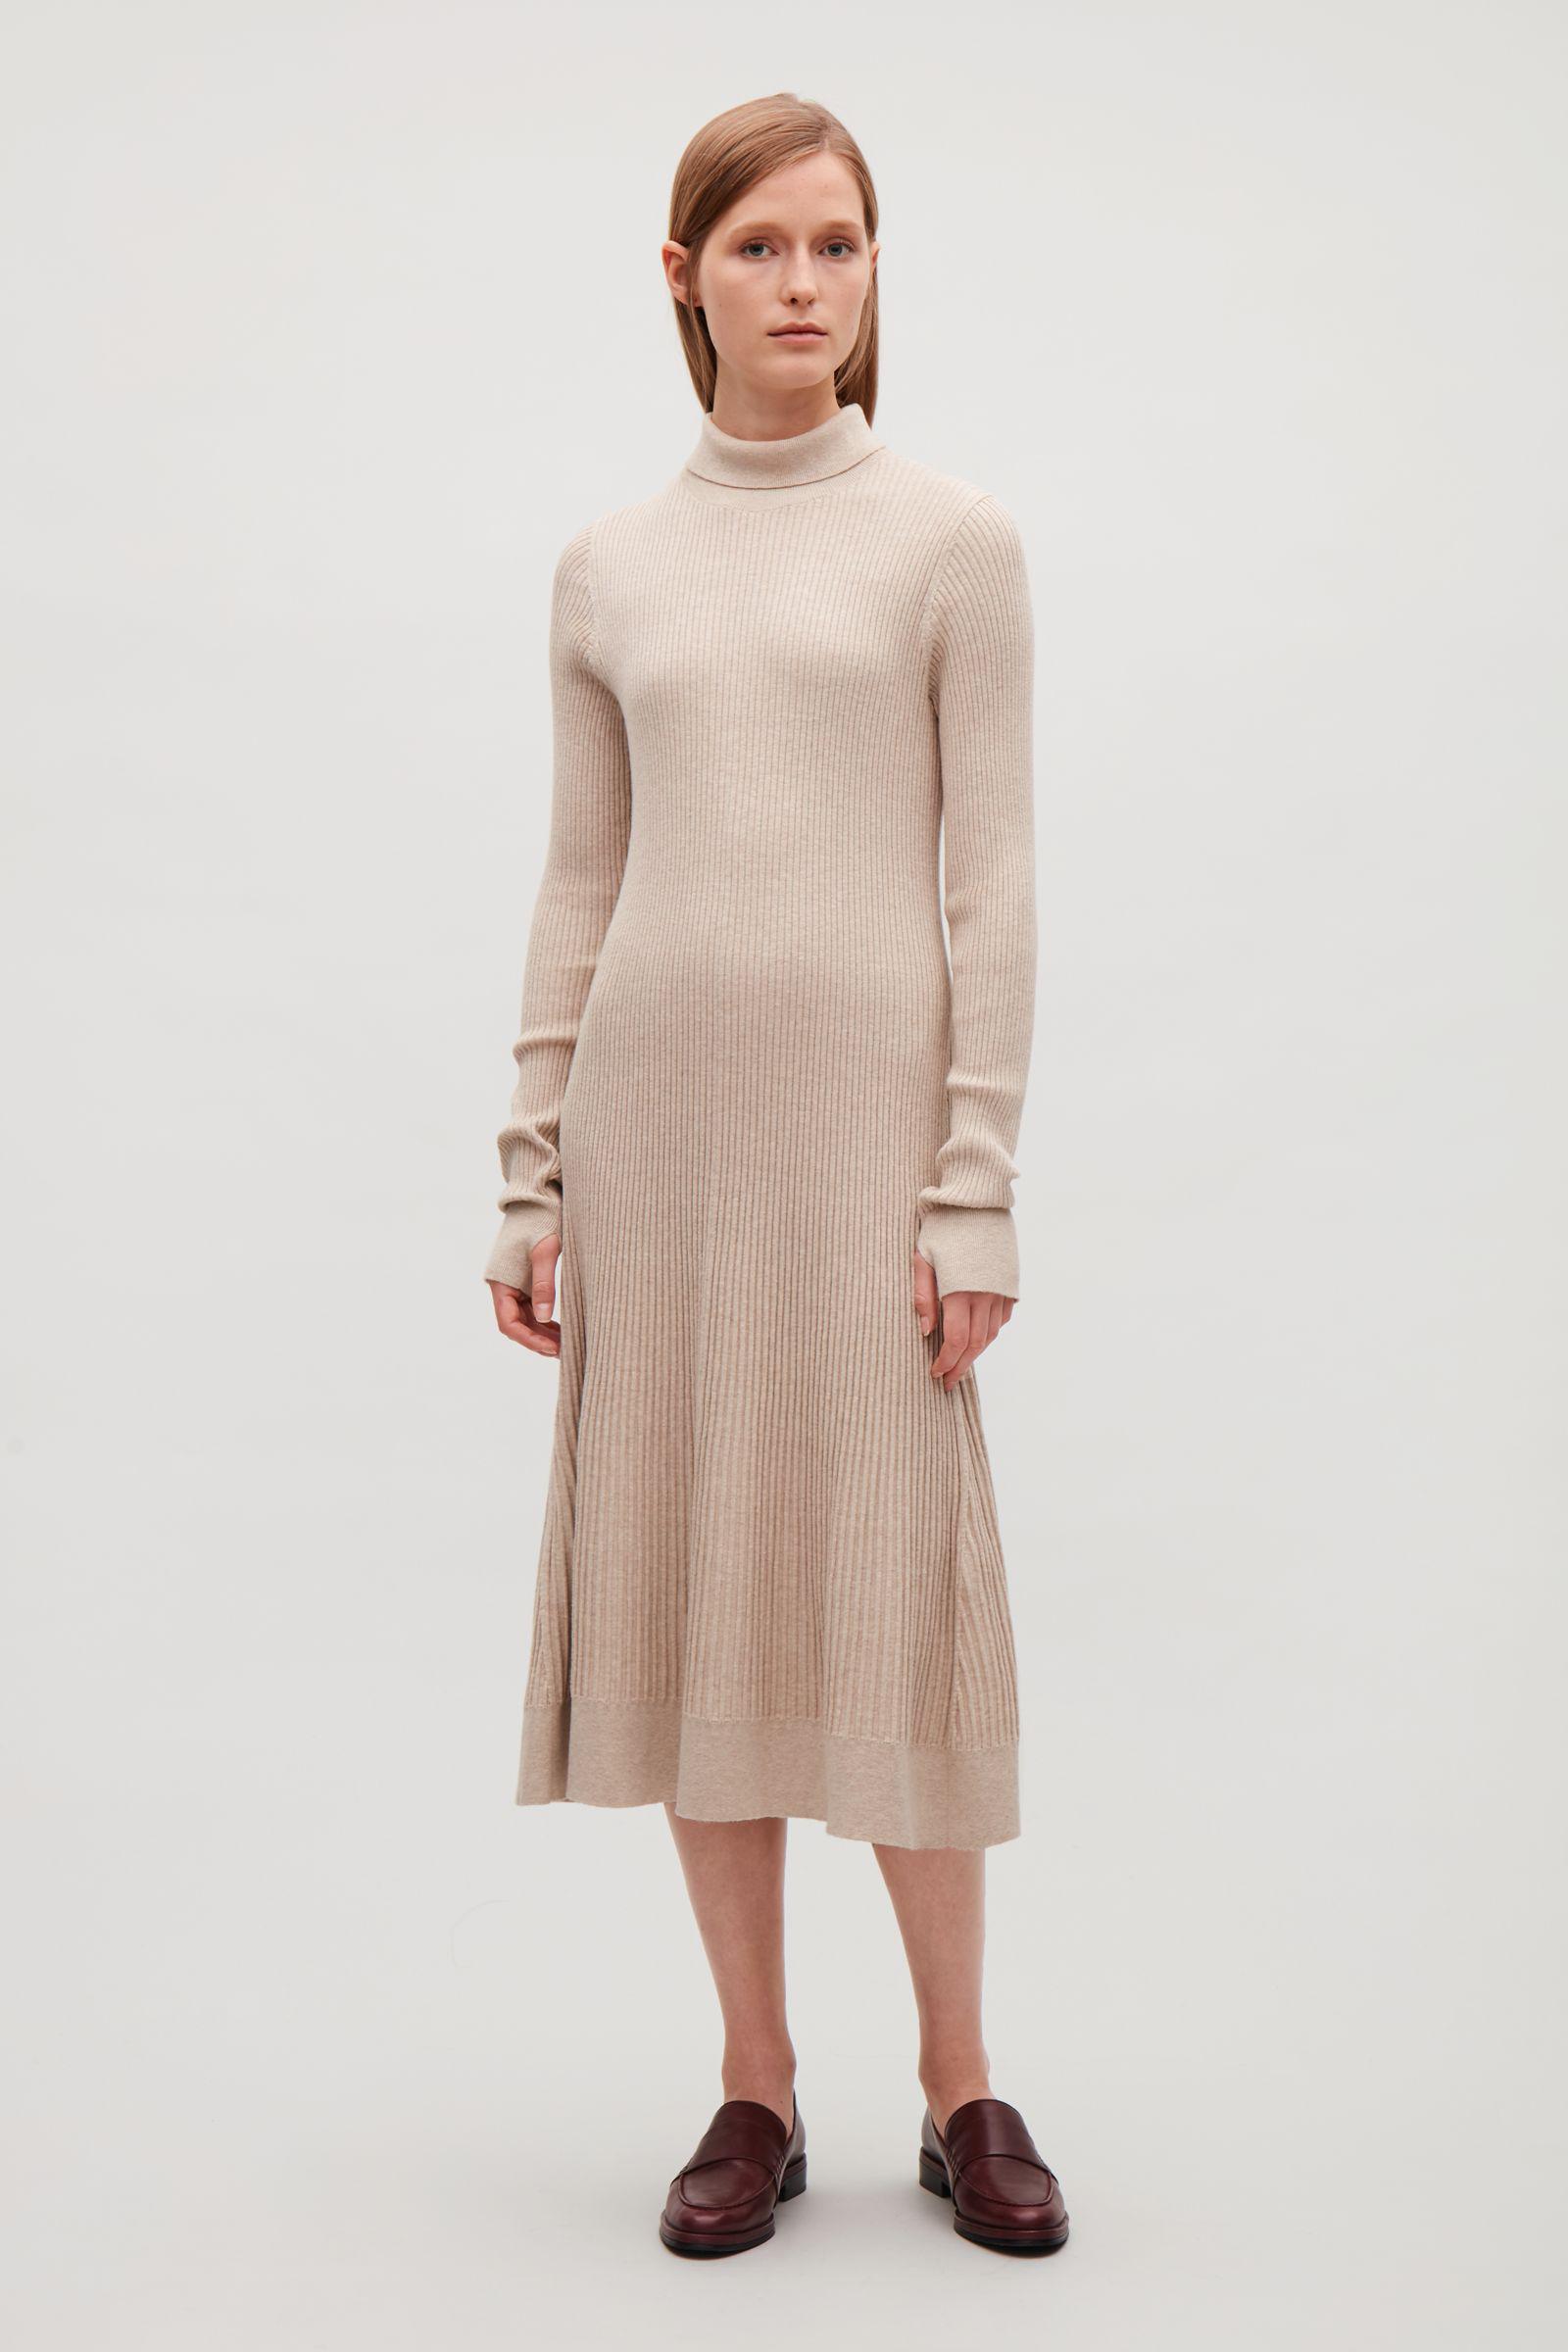 COS Cotton Rib-knit Dress in Sand (Natural) | Lyst